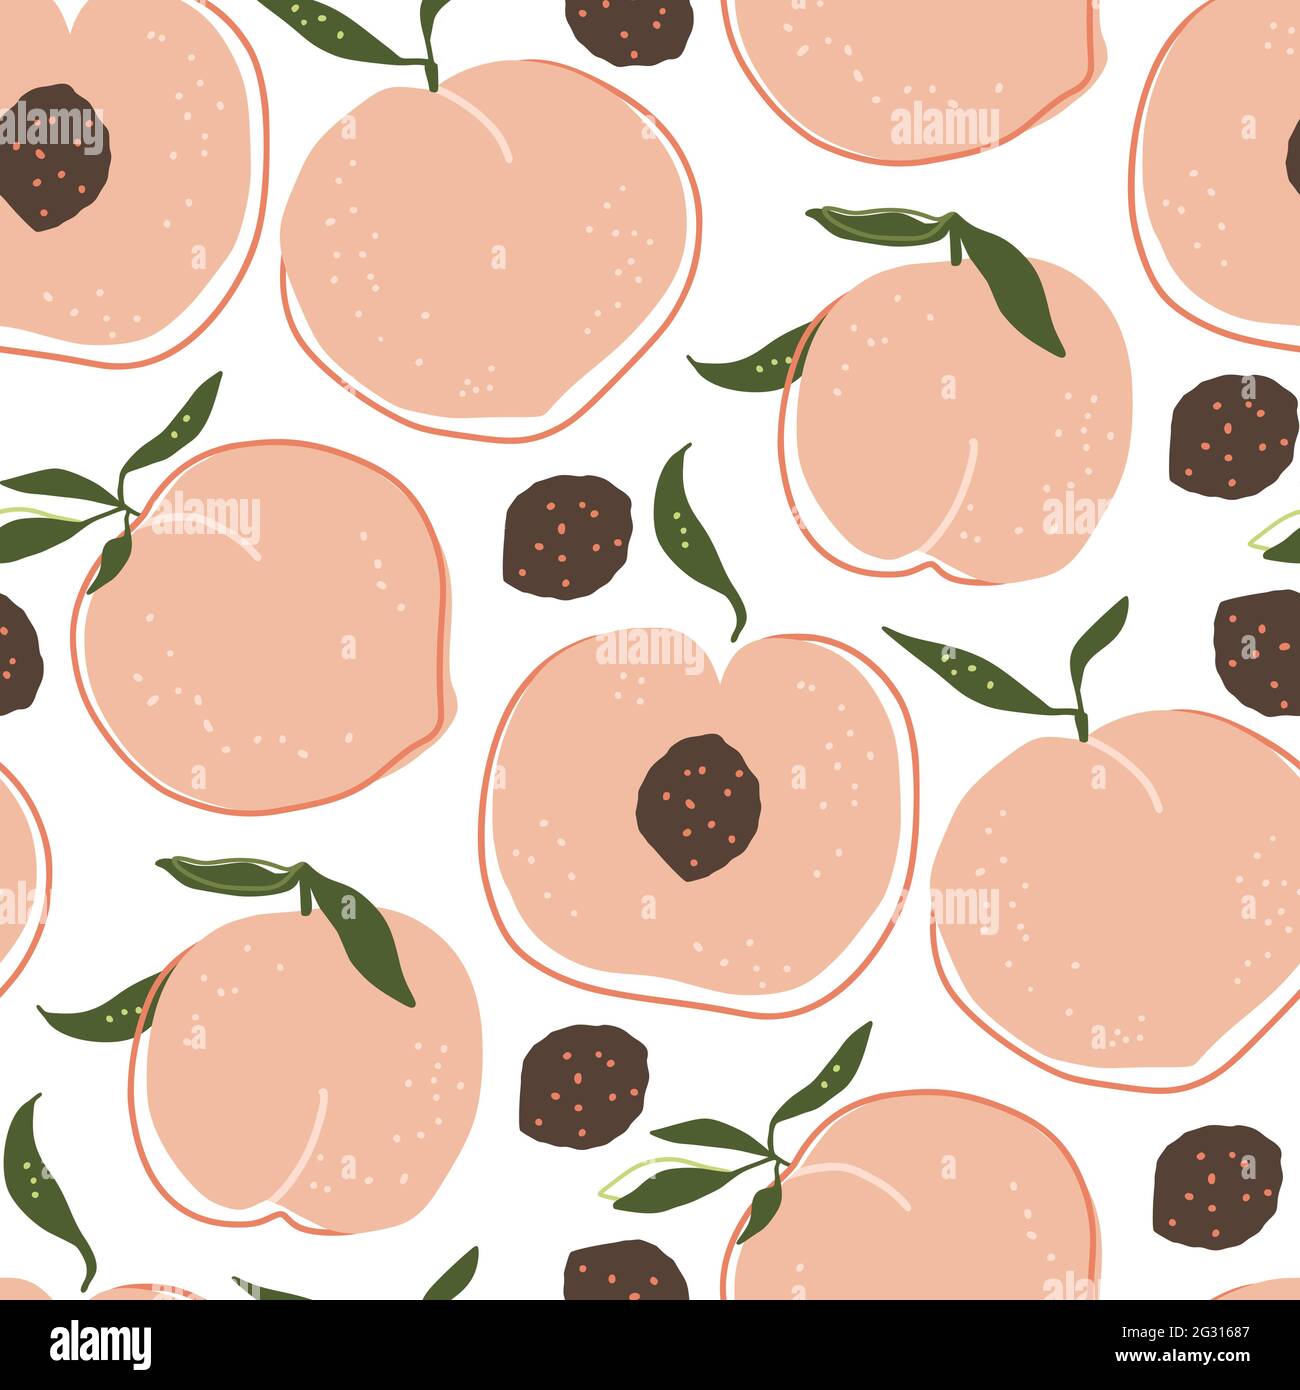 Summer Fruit Seamless Pattern by Sarah Barnes on Dribbble